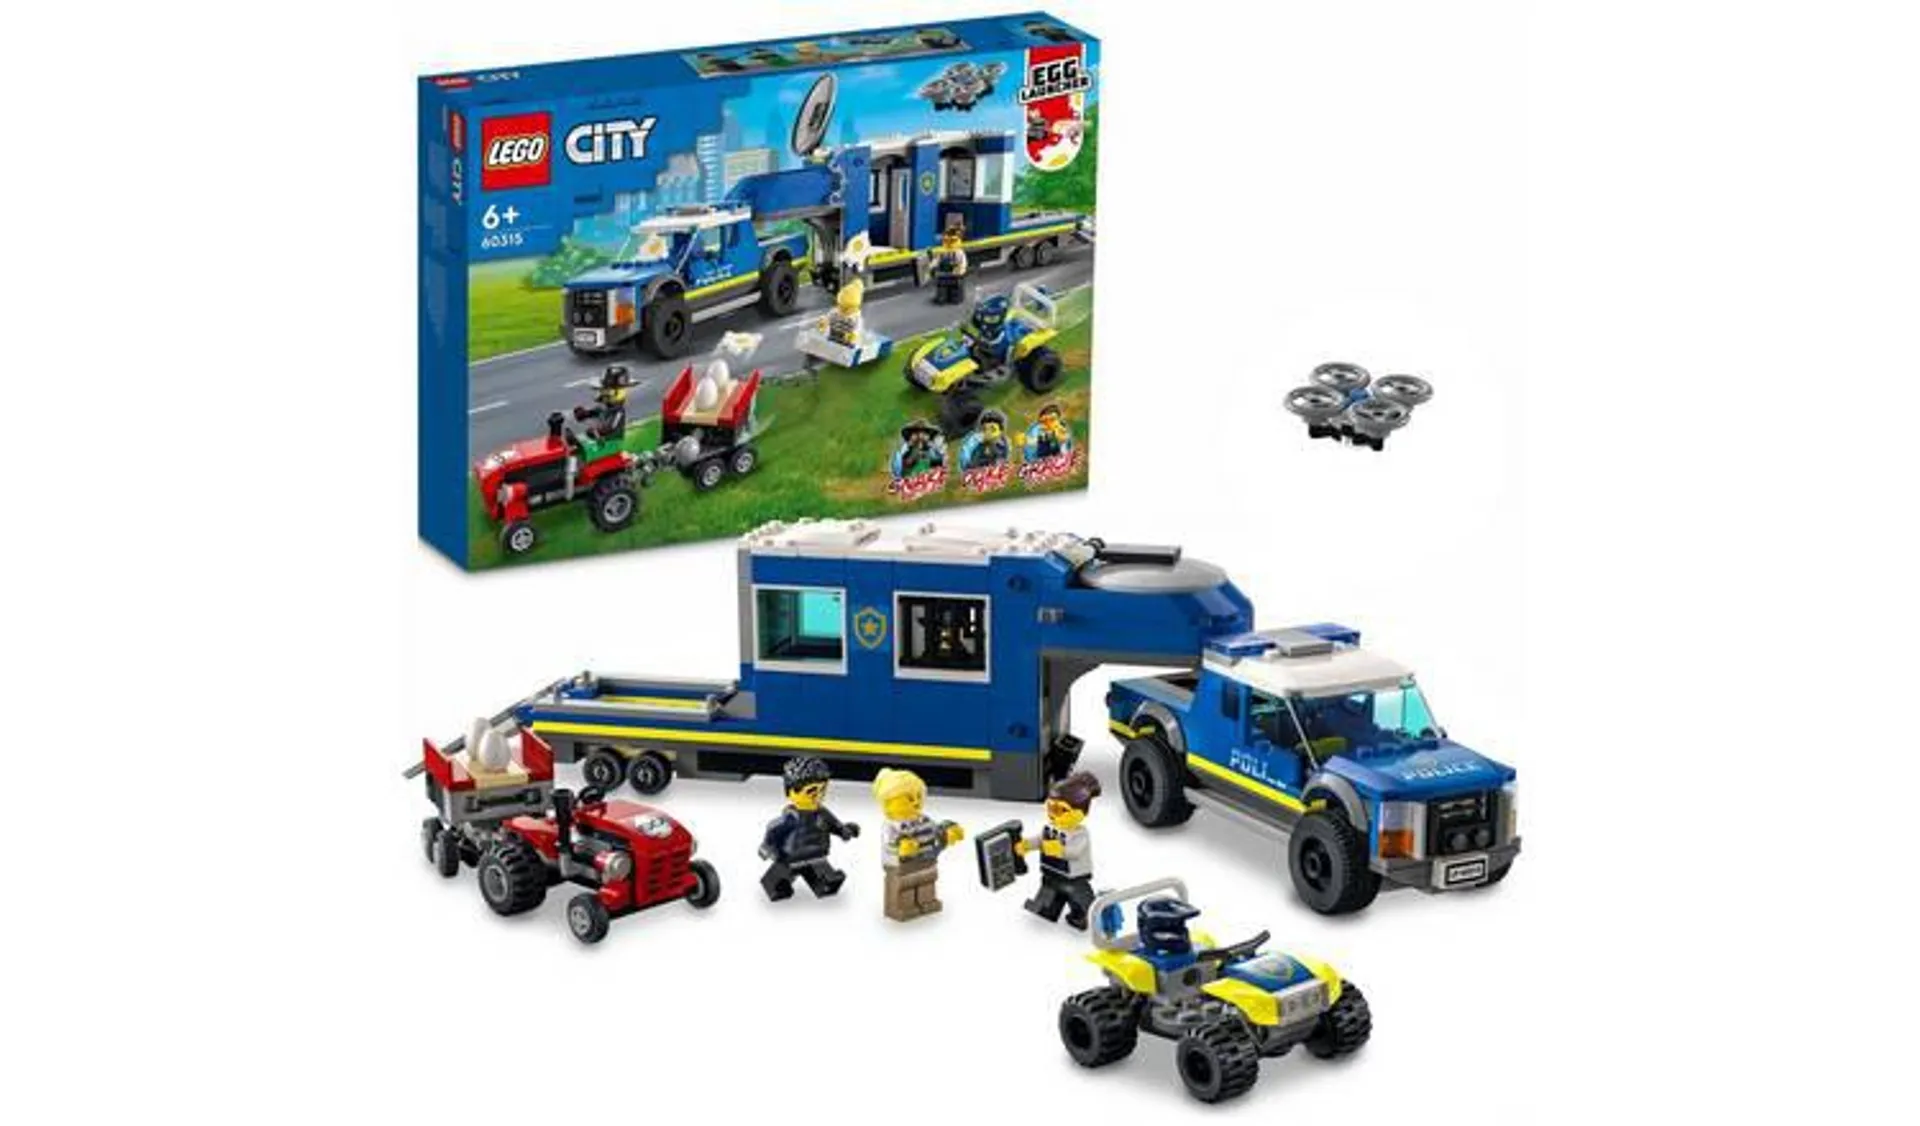 LEGO City Police Mobile Command Truck and Tractor Toys 60315